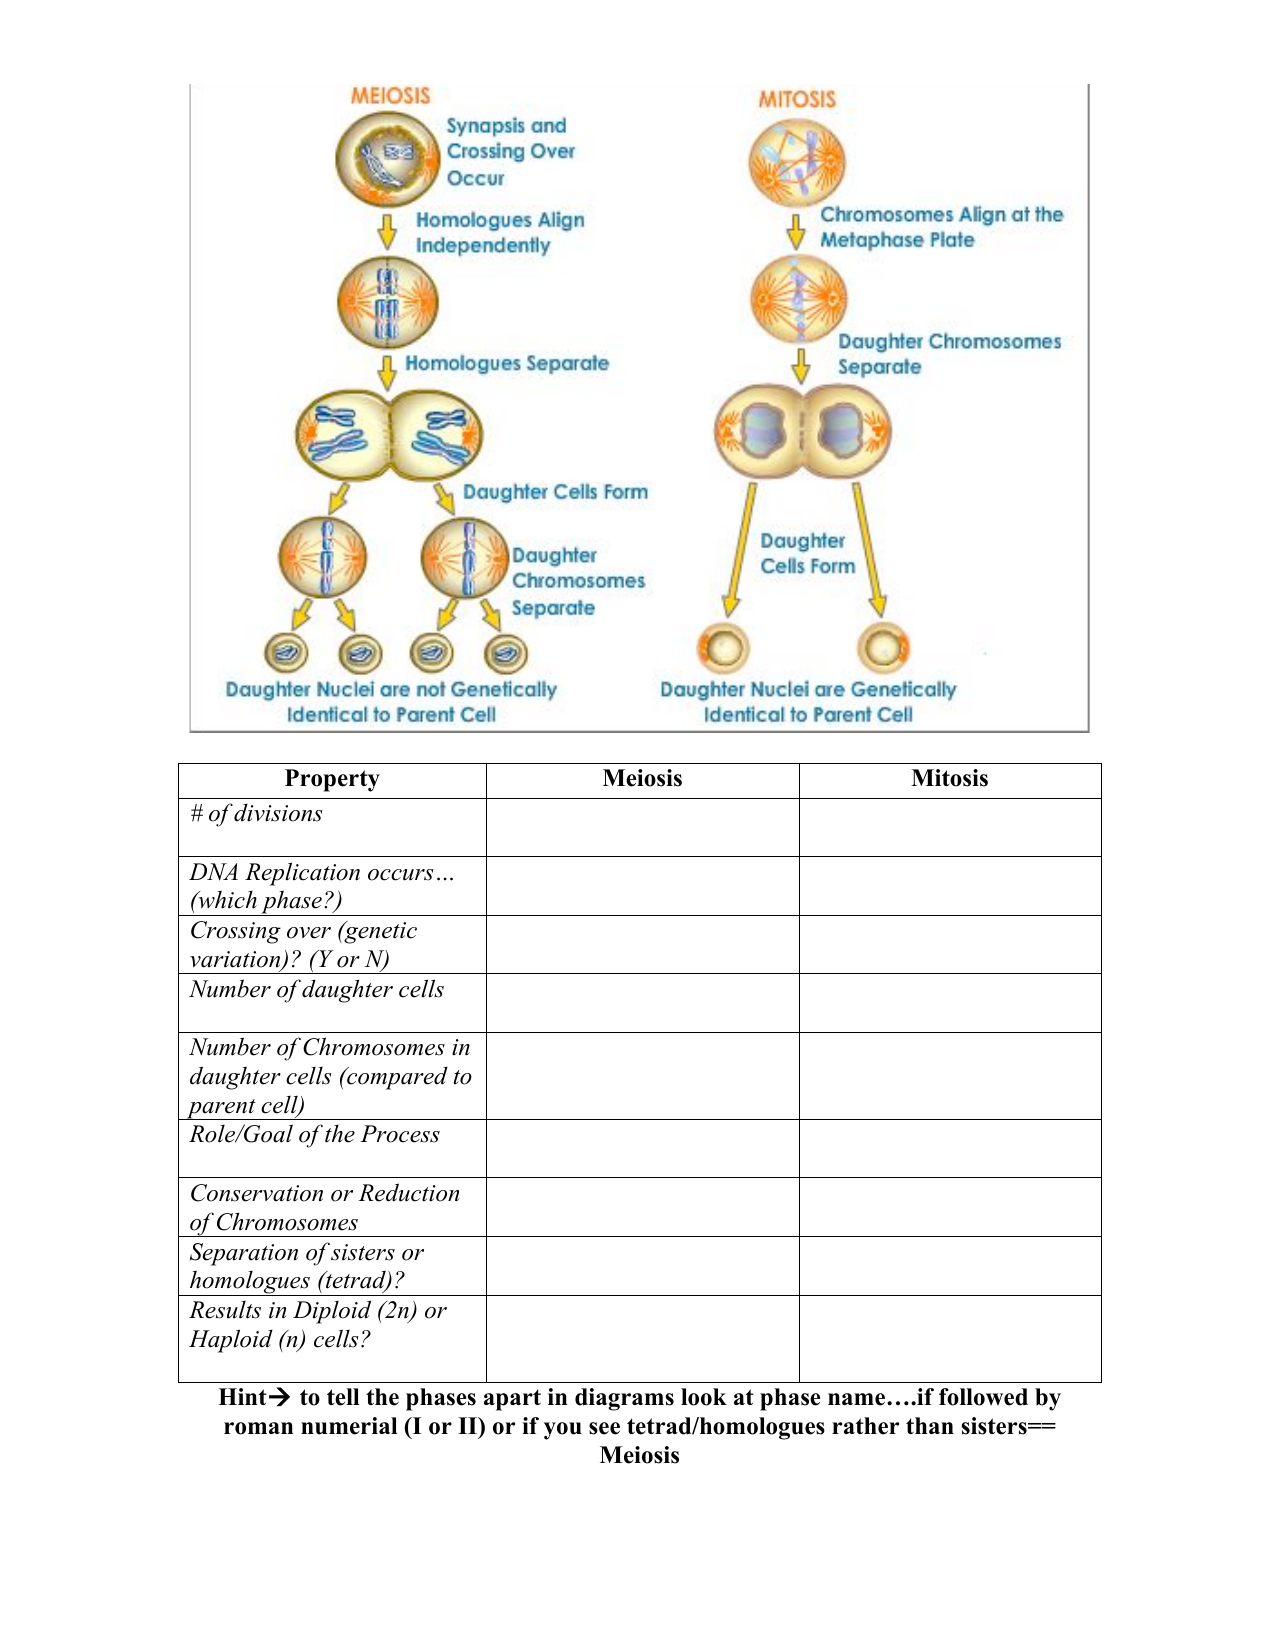 mitosis-and-meiosis-chart